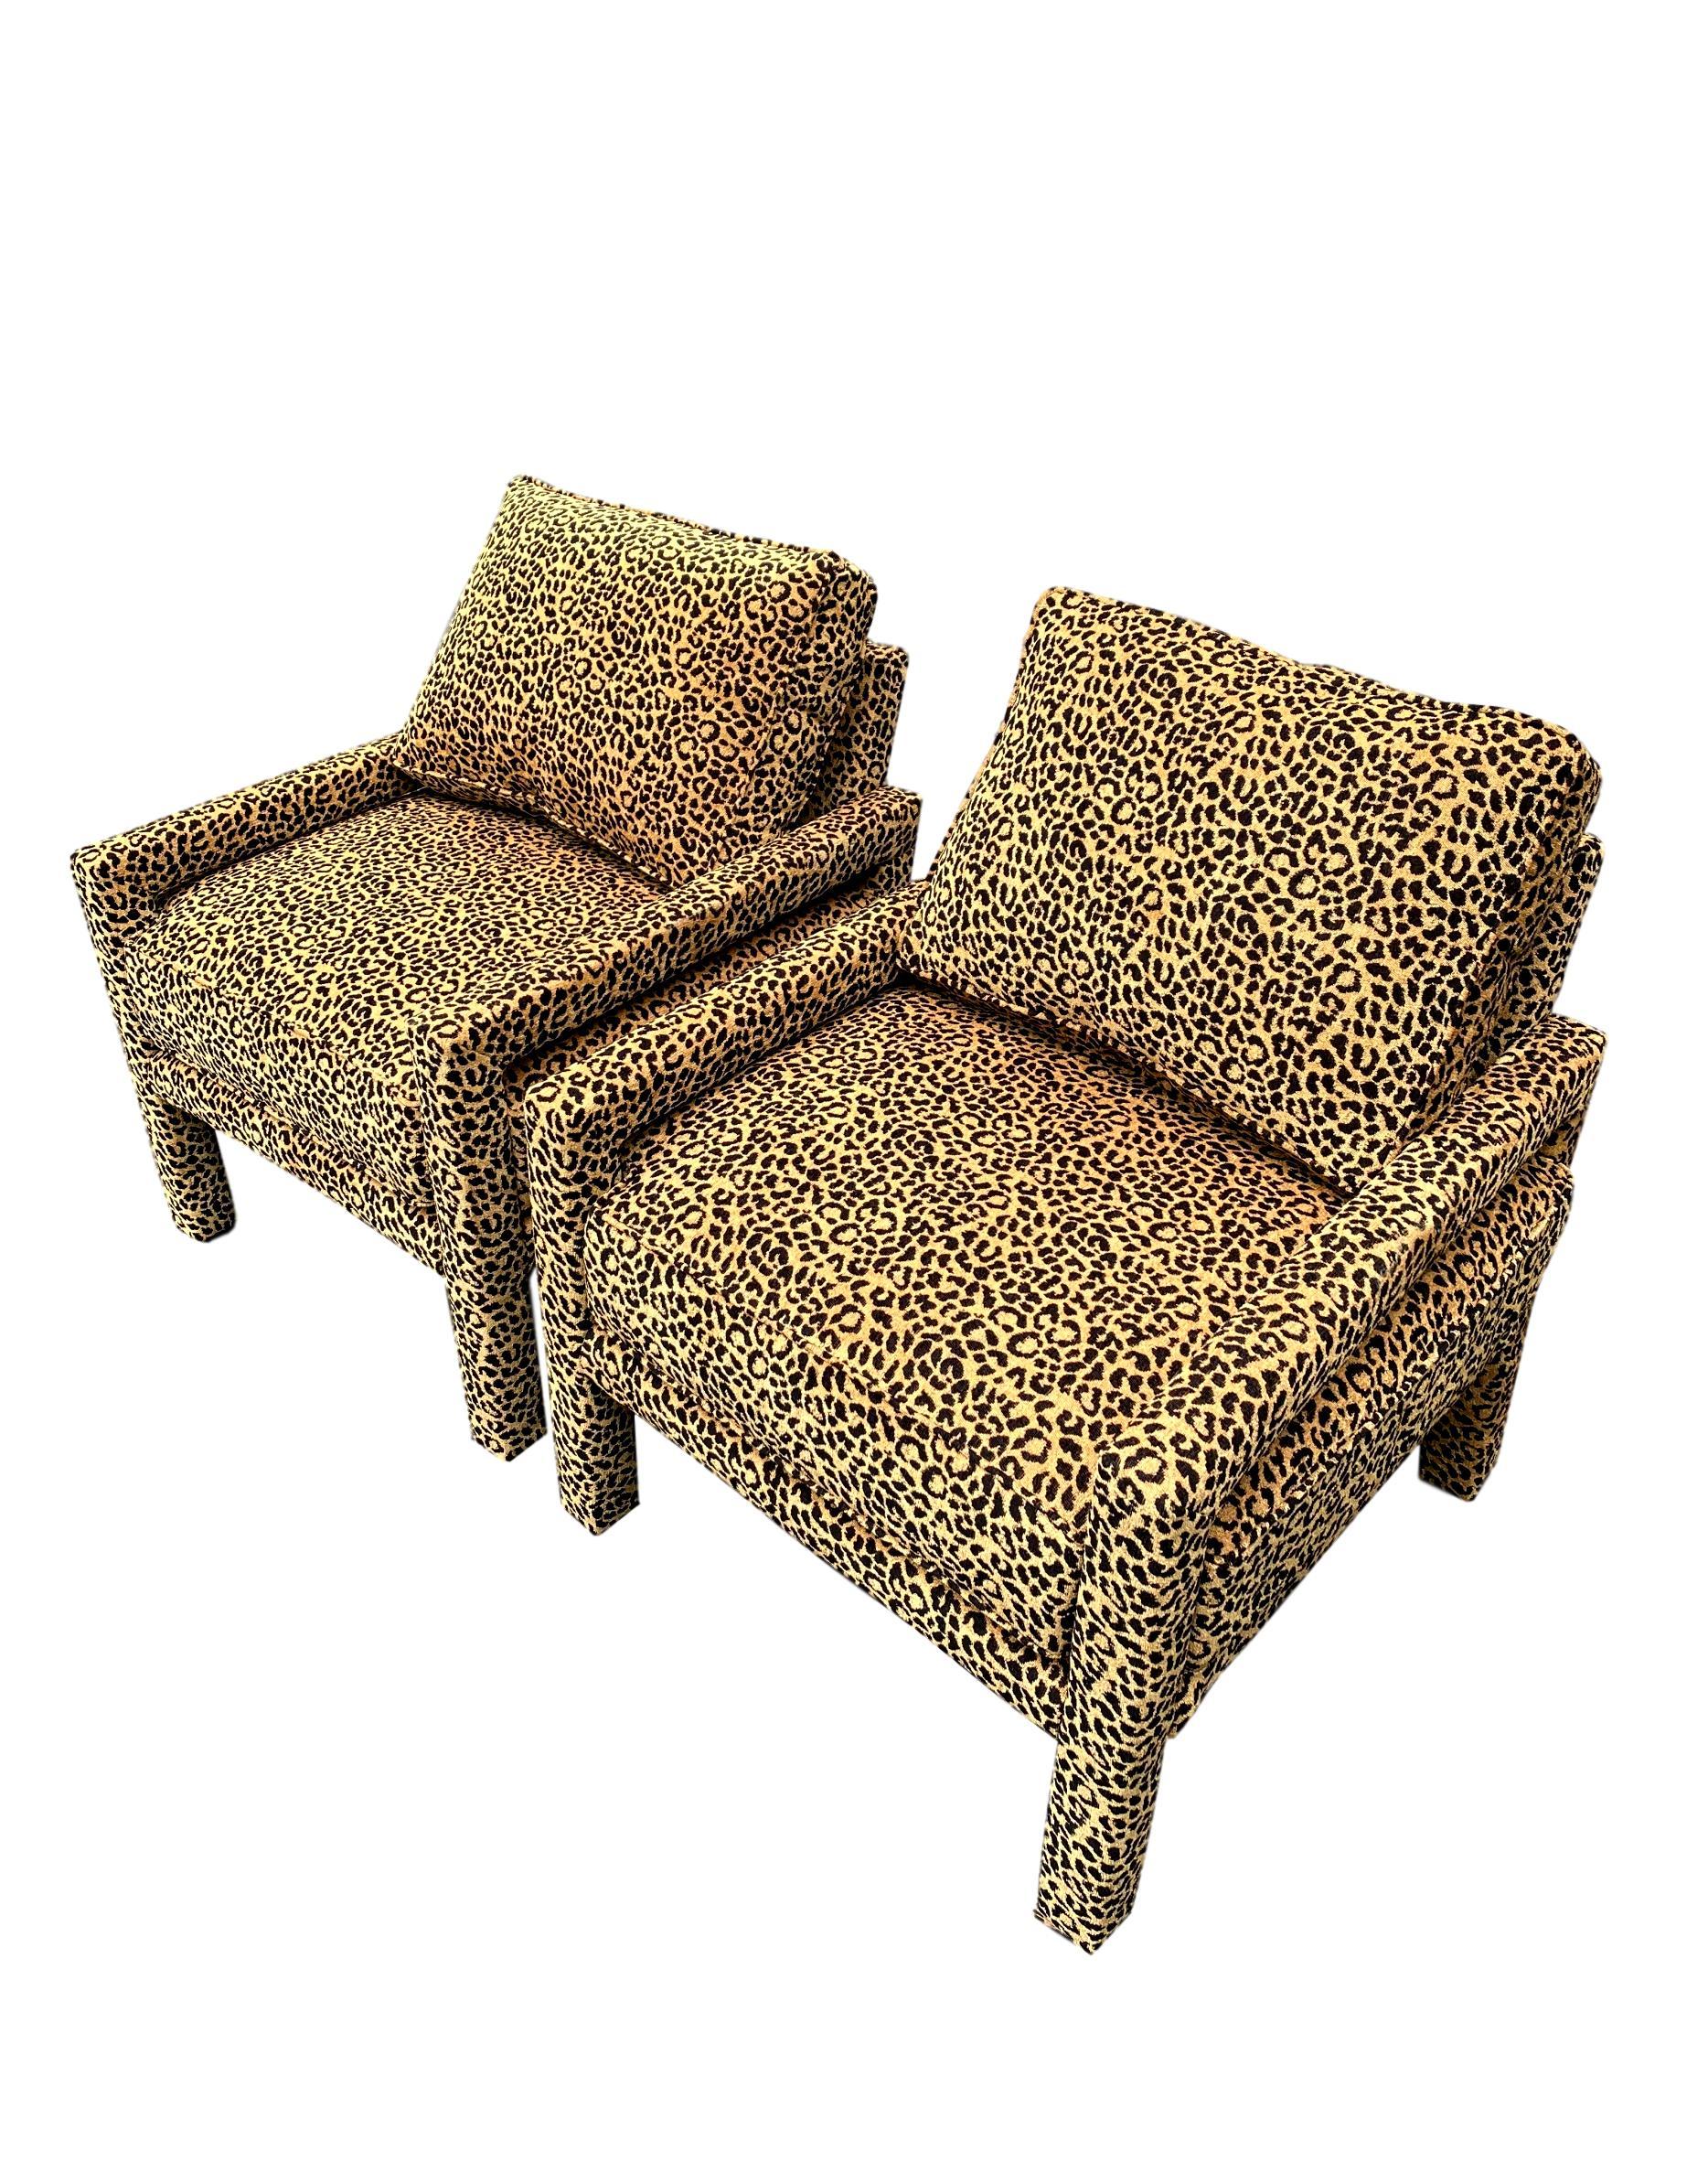 American Pair of New Milo Baughman Style Iconic Parsons Chairs in Leopard Chenille